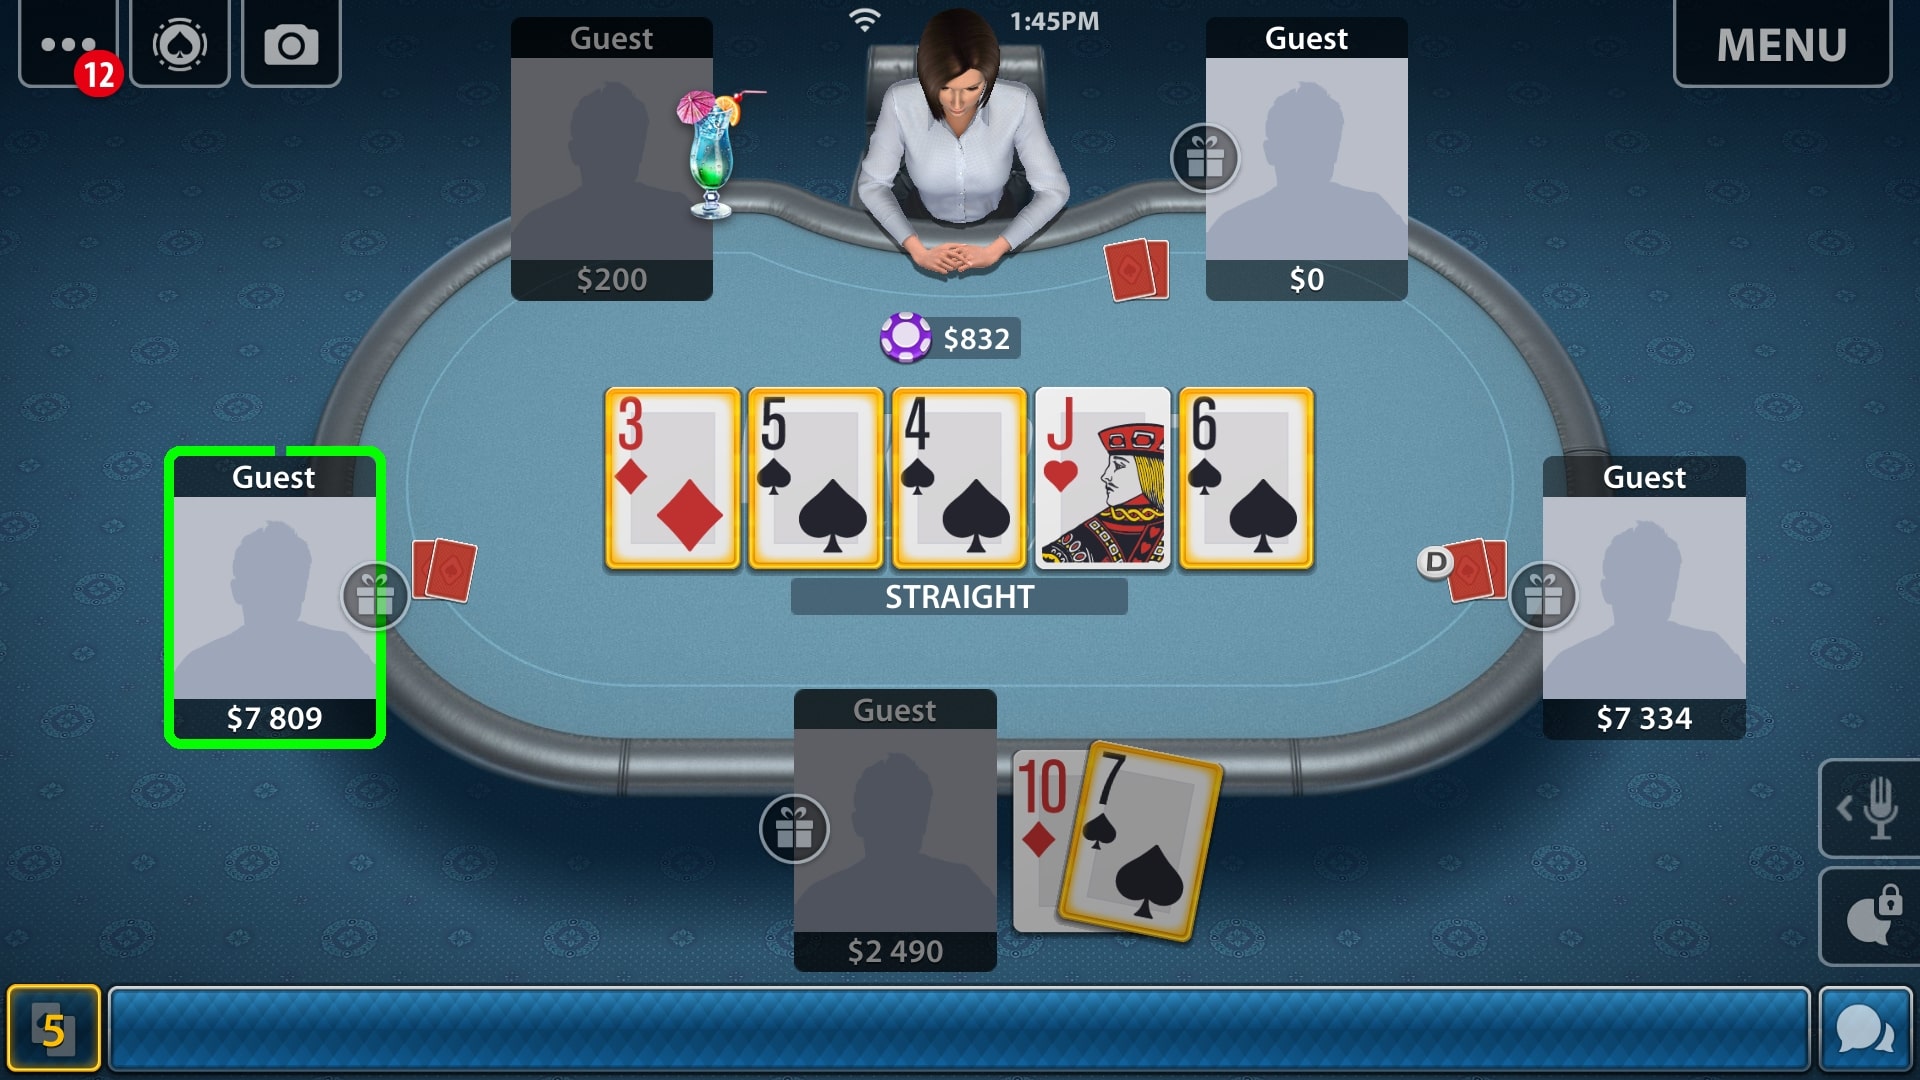 best android poker app real money